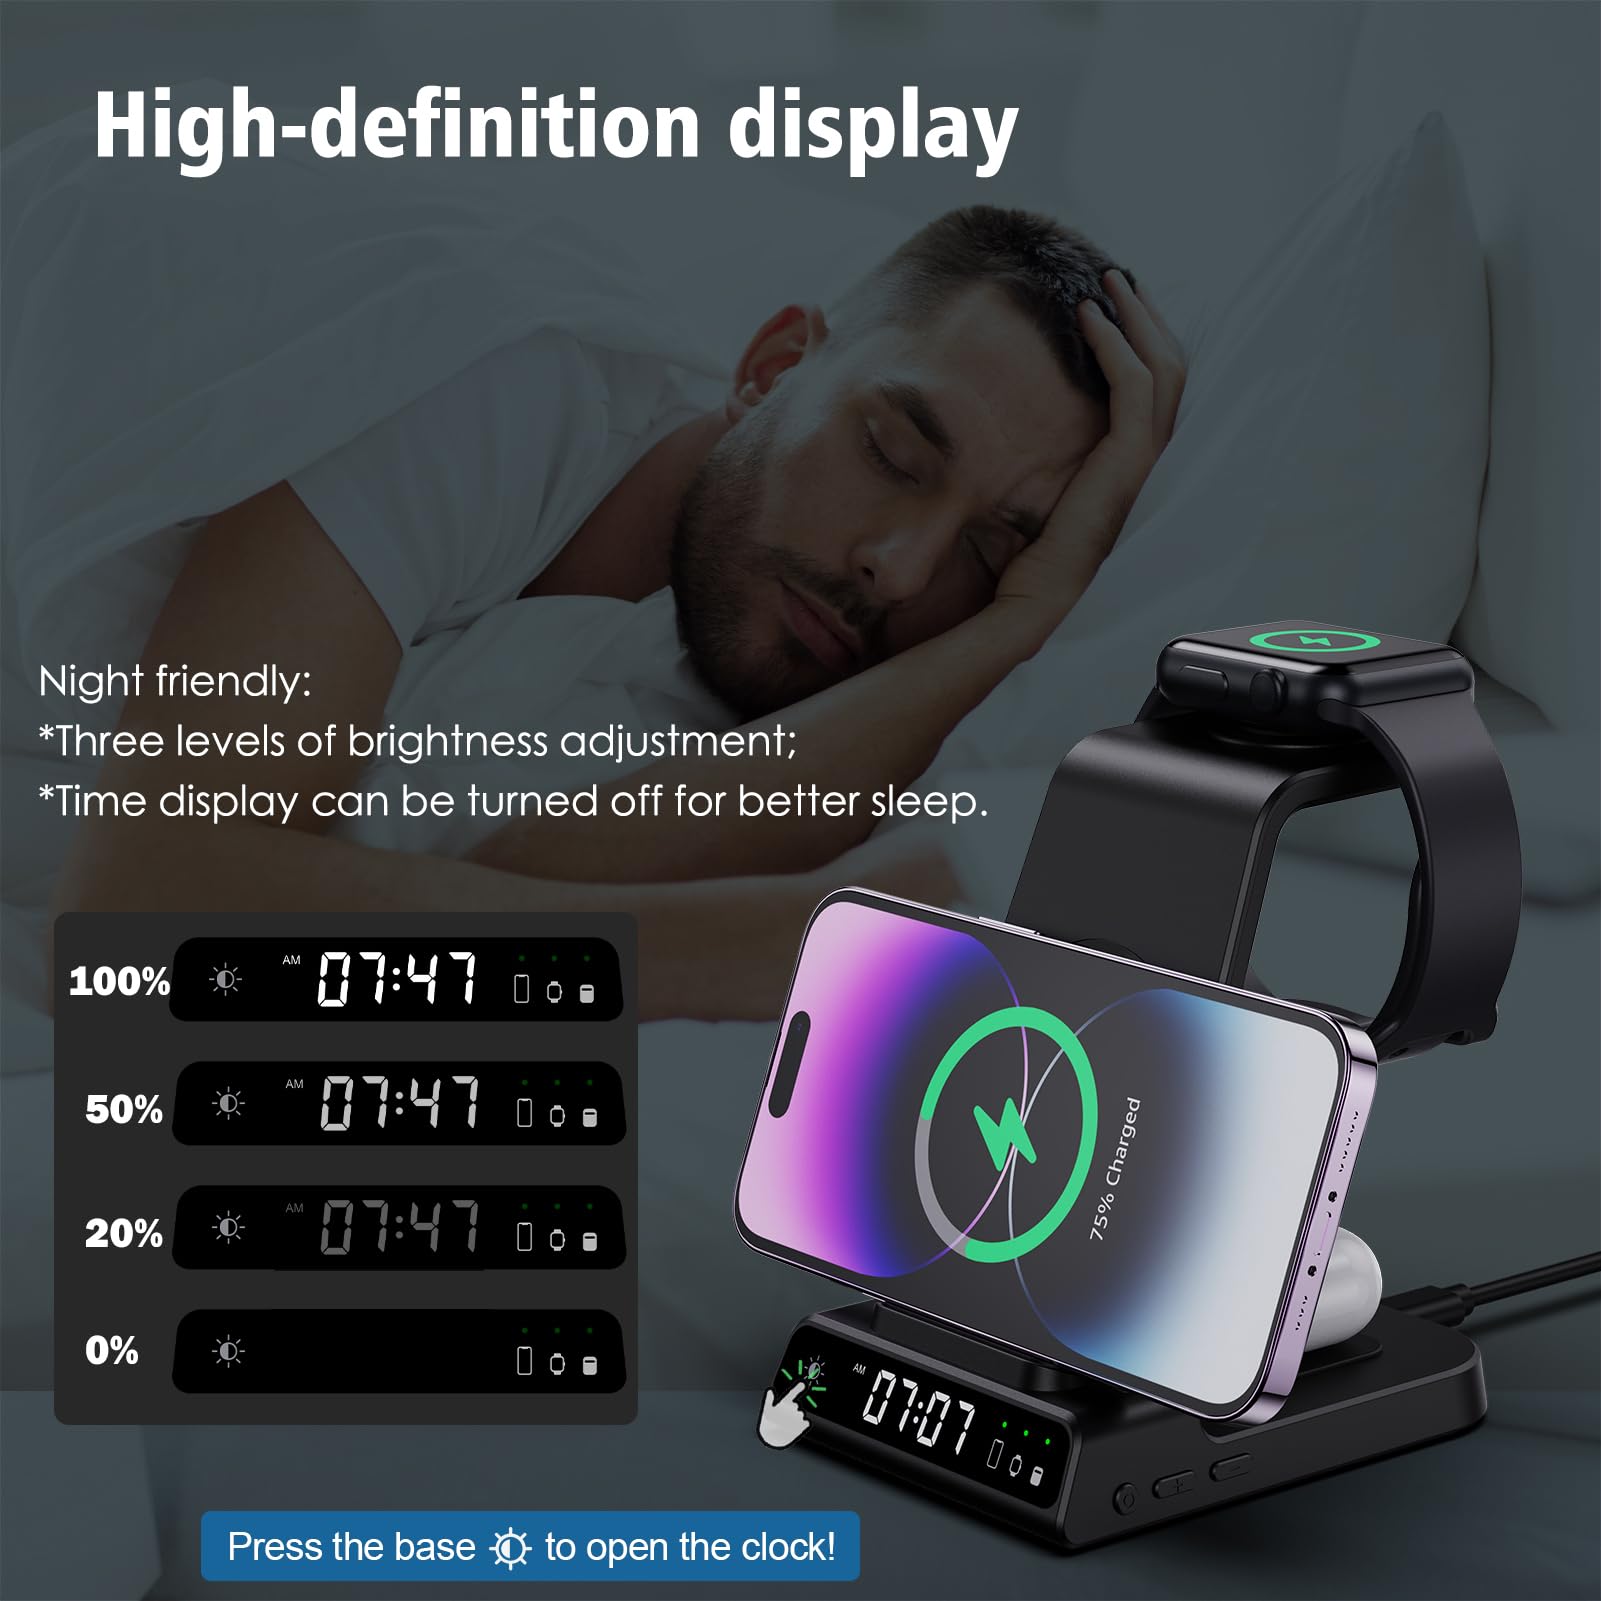 Wireless Charging Station, YiJYi 3 in 1 Watch Charger Stand with Digital Clock Suitable for iWatch SE/6/5/4/3/2/1,AirPods Pro, for iPhone 13/12/12 Pro Max/11 Series/XS/XR/X/8/Samsung Galaxy